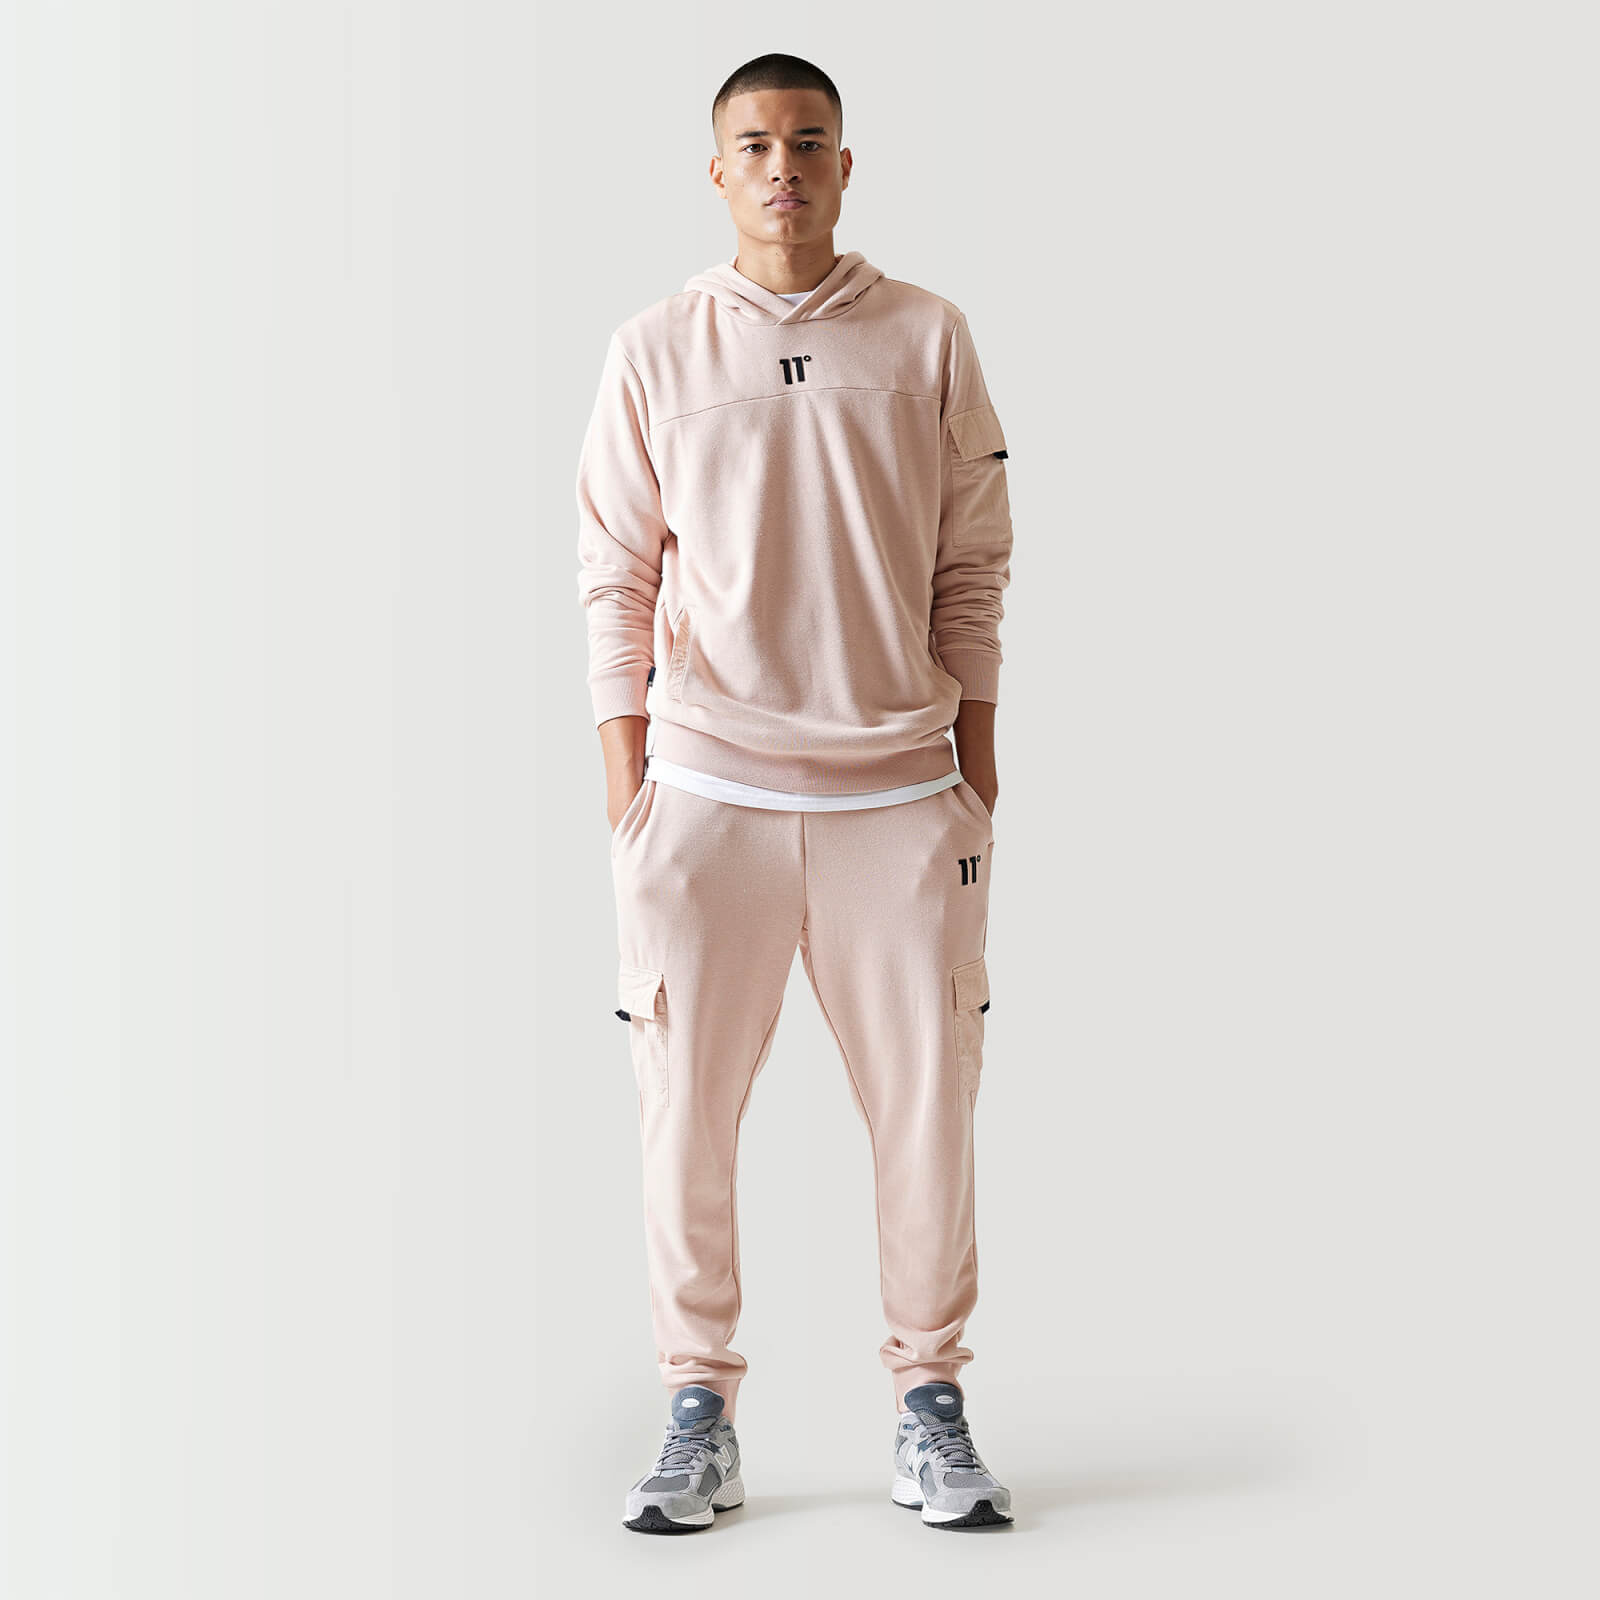 11 Degrees Woven Pocket Joggers - Putty Pink - XS from 11 Degrees